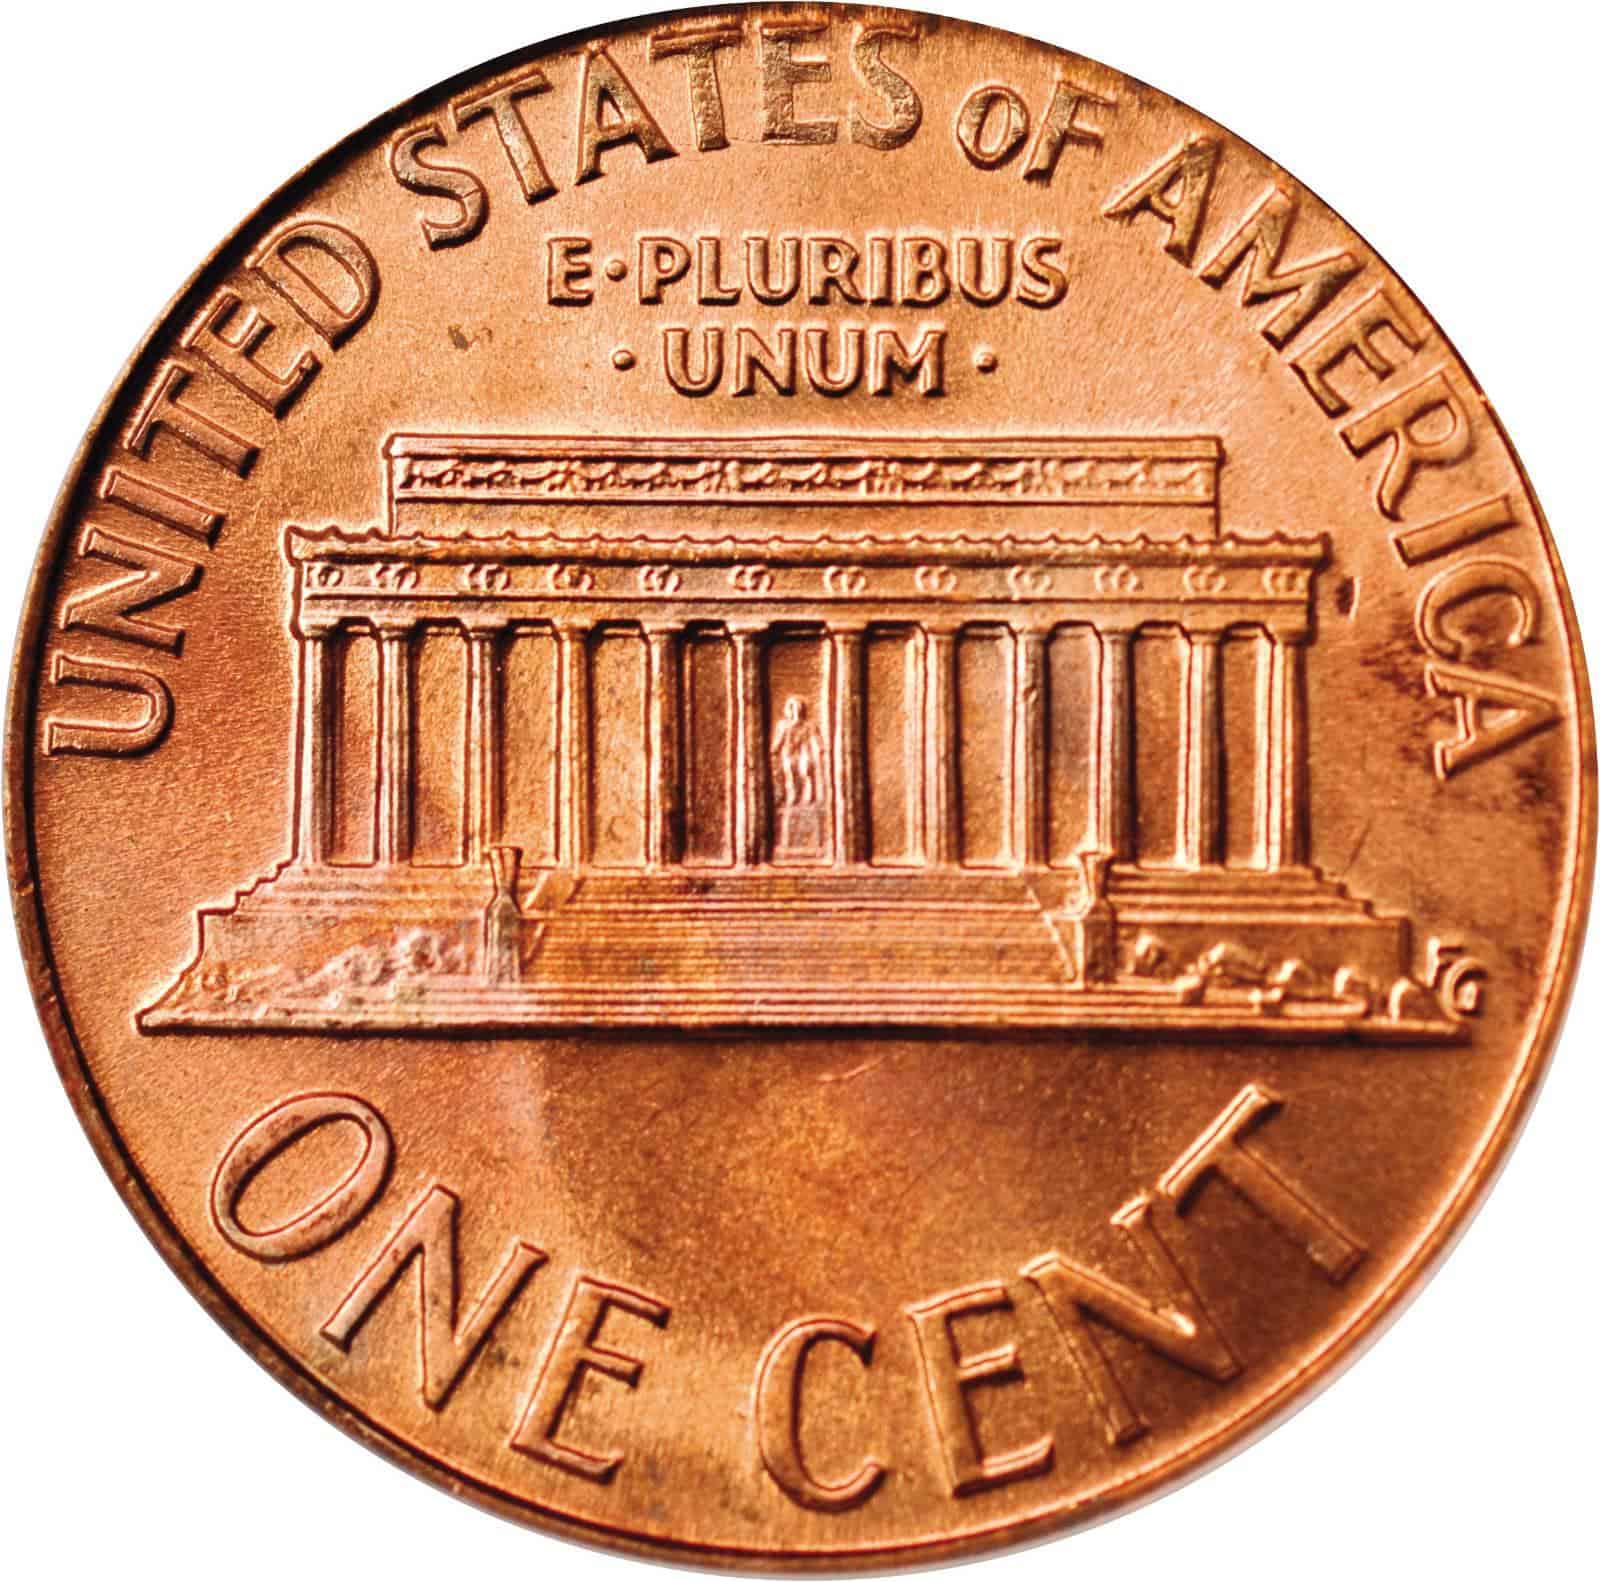 The Reverse of the 1974 Penny